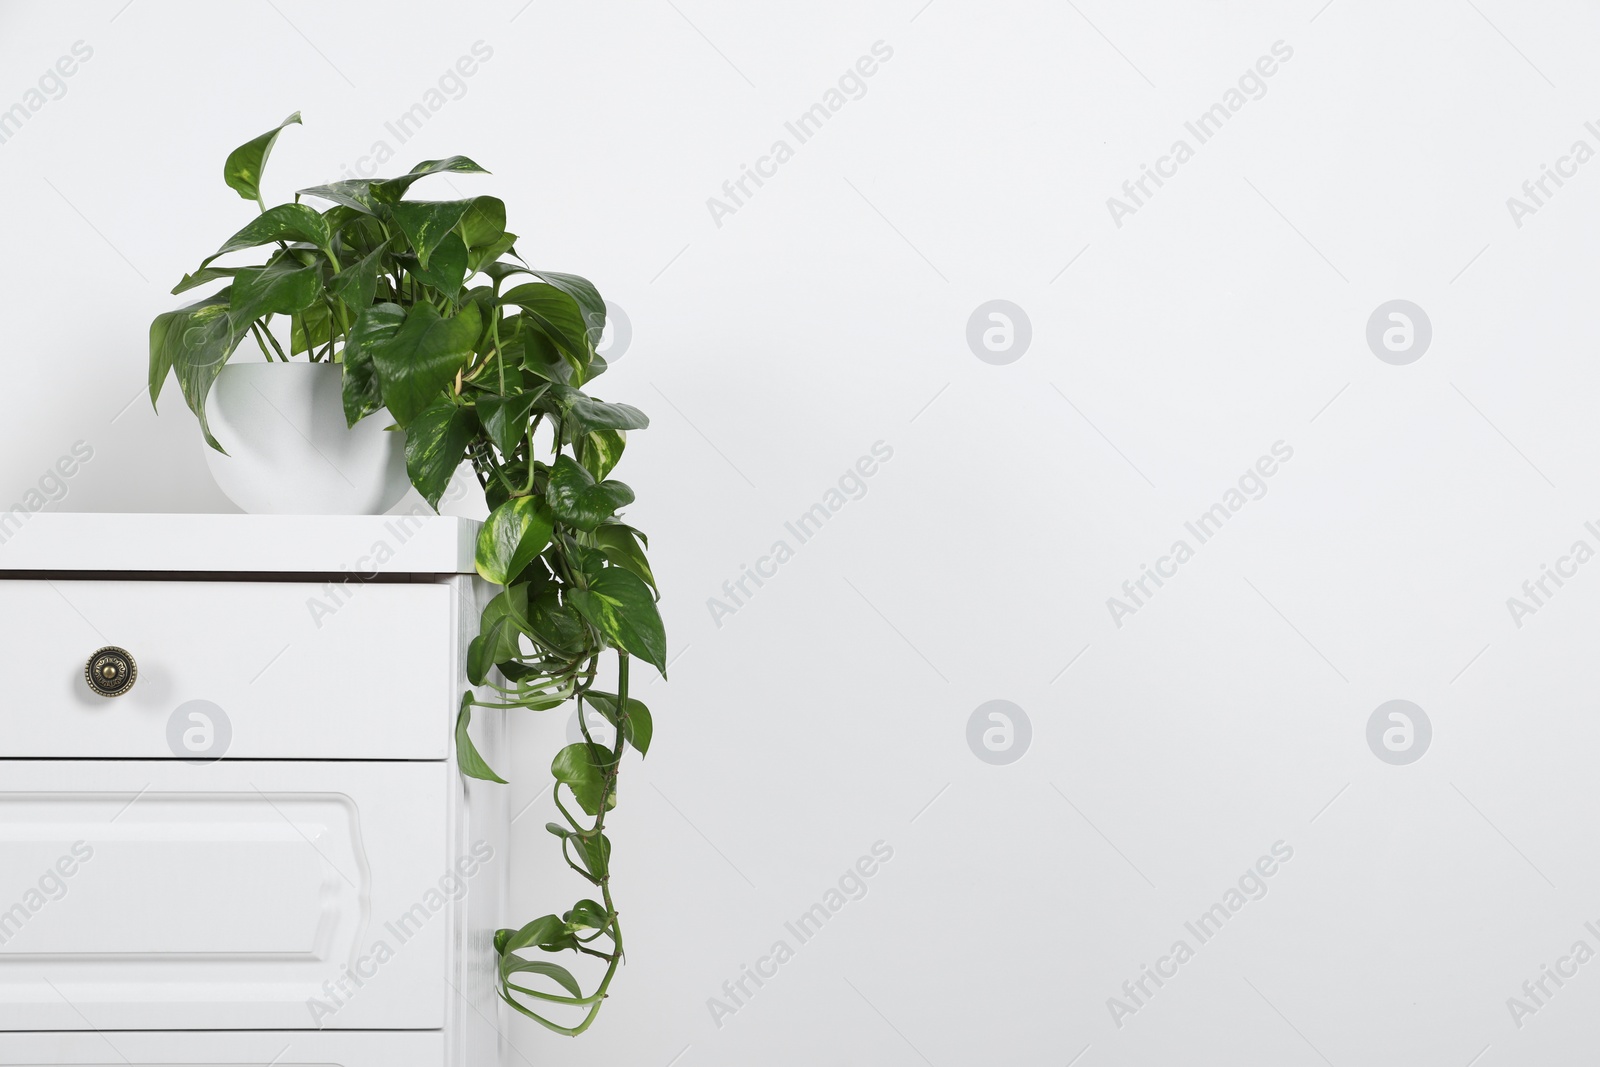 Photo of Potted aureum on chest of drawers near white wall, space for text. Beautiful houseplant